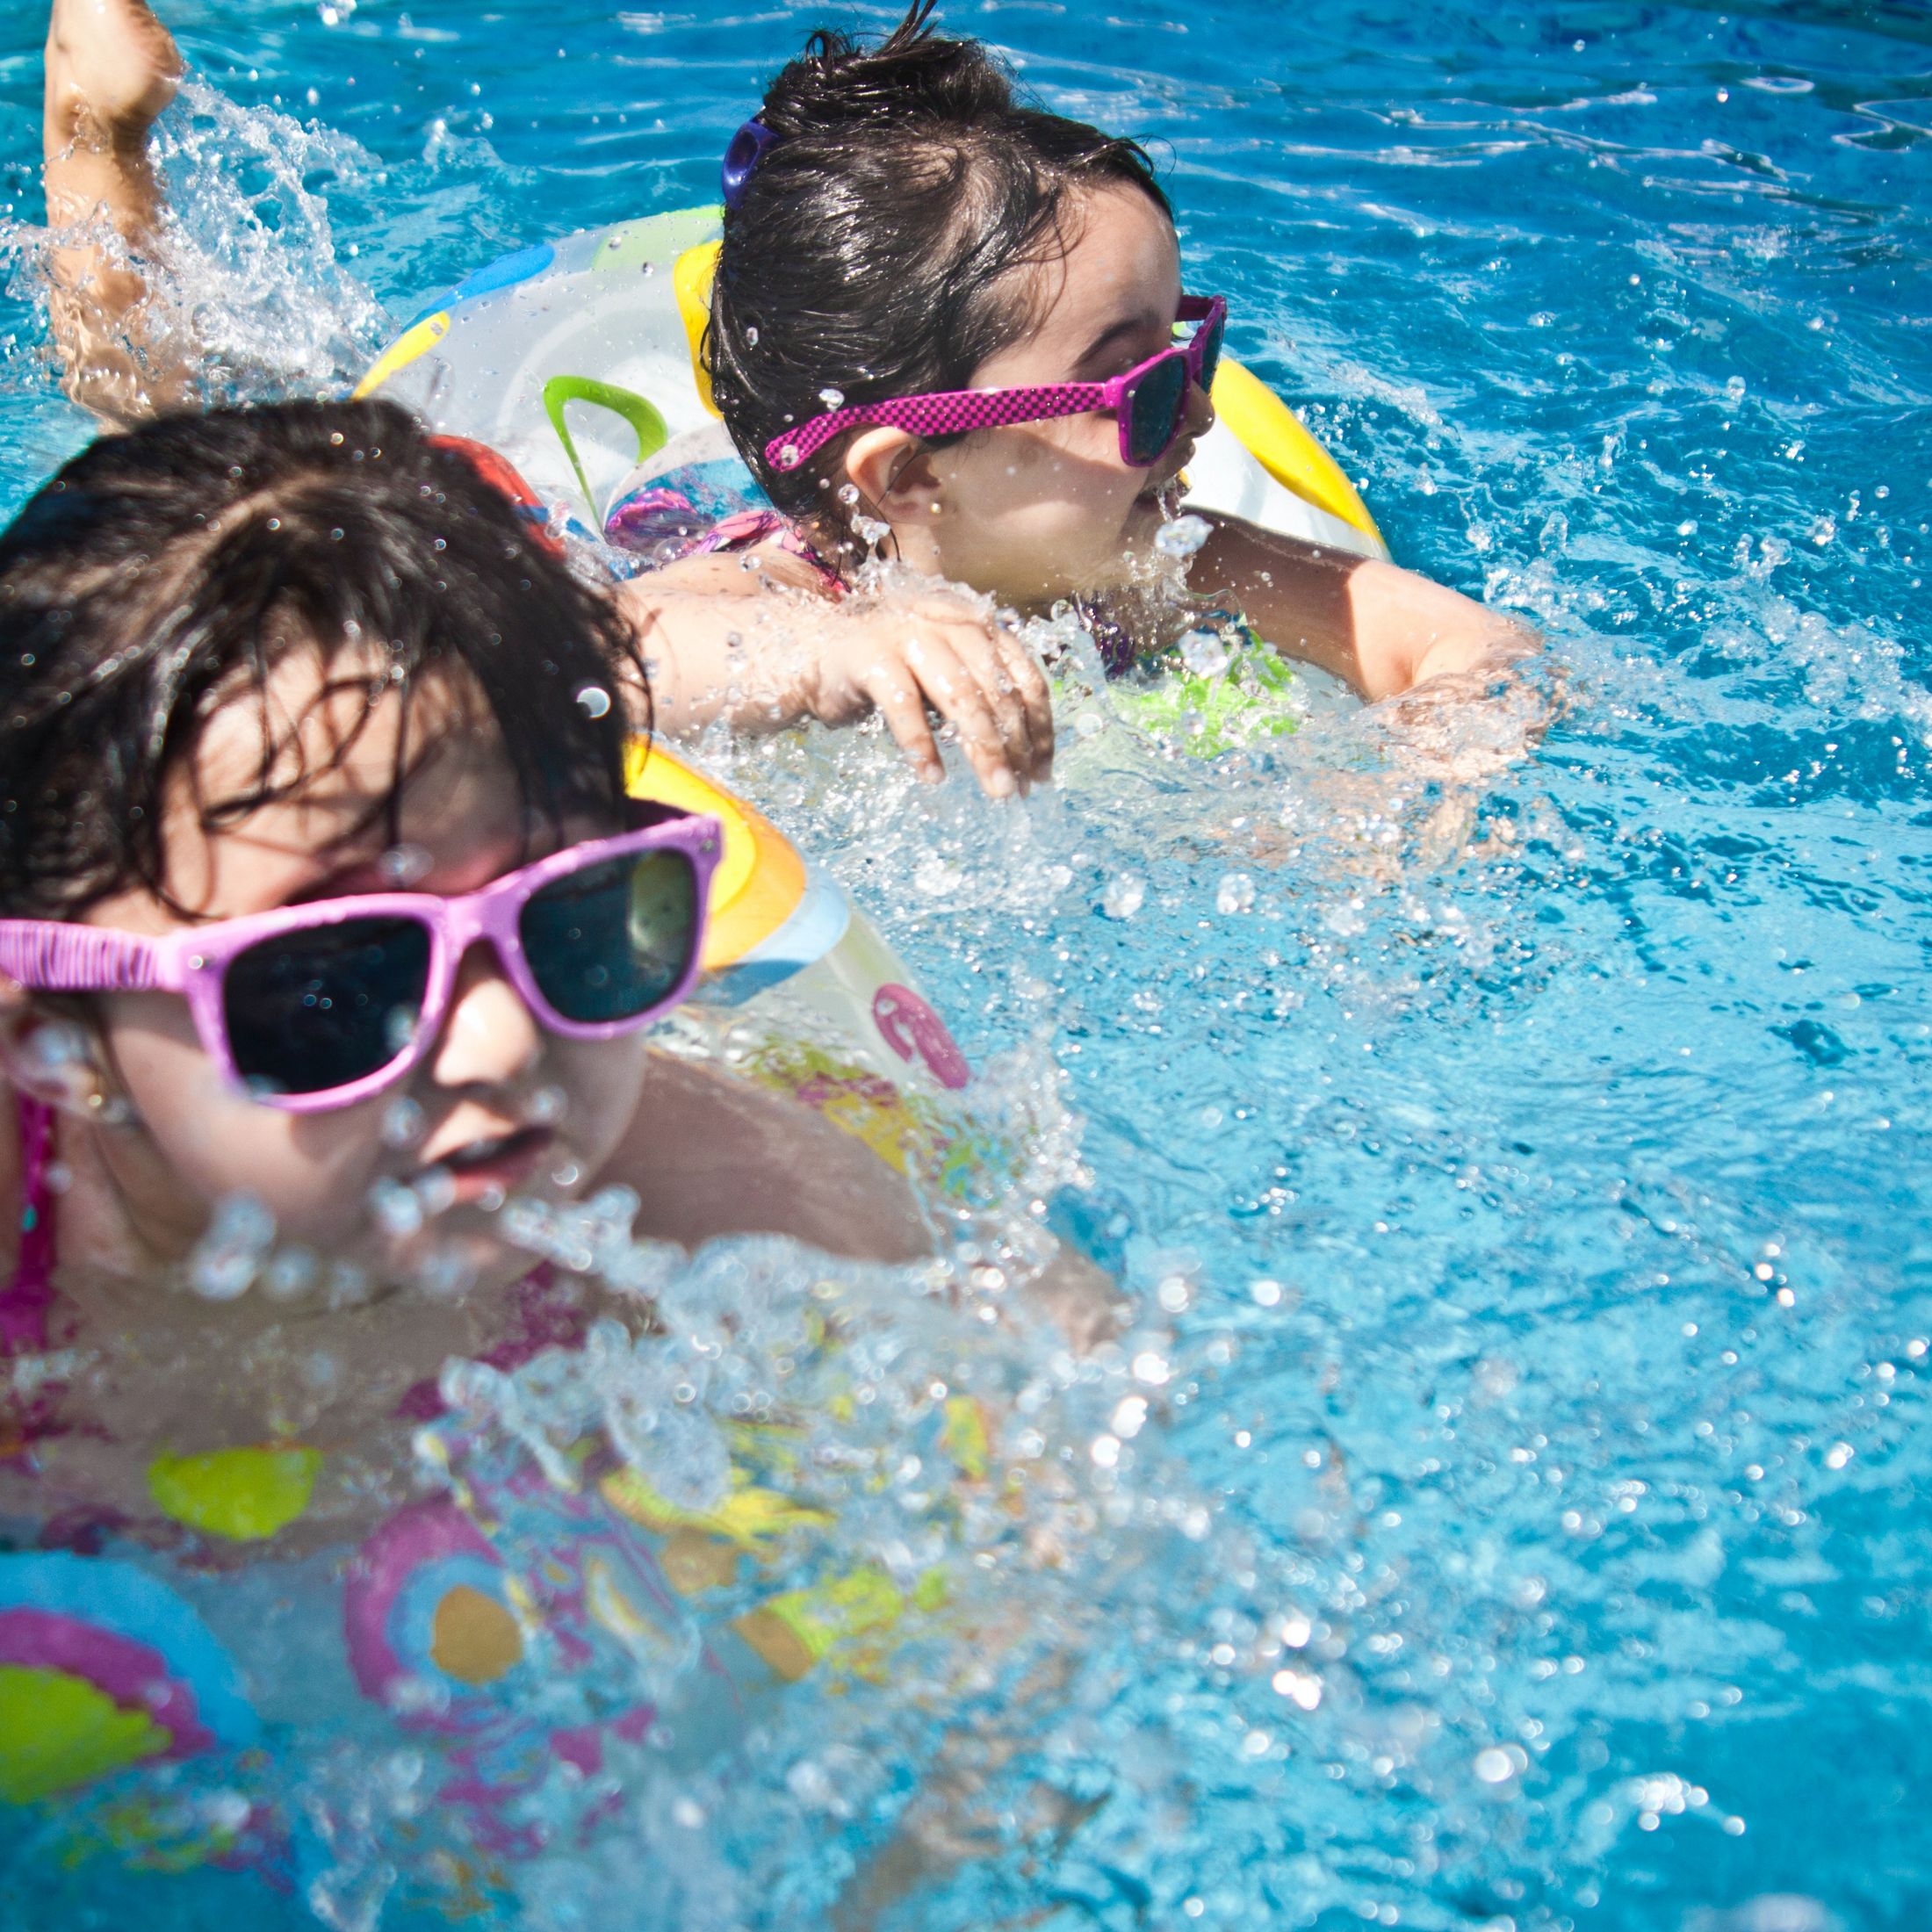 Two young children in swim rings and pink sunglasses floating in a pool.